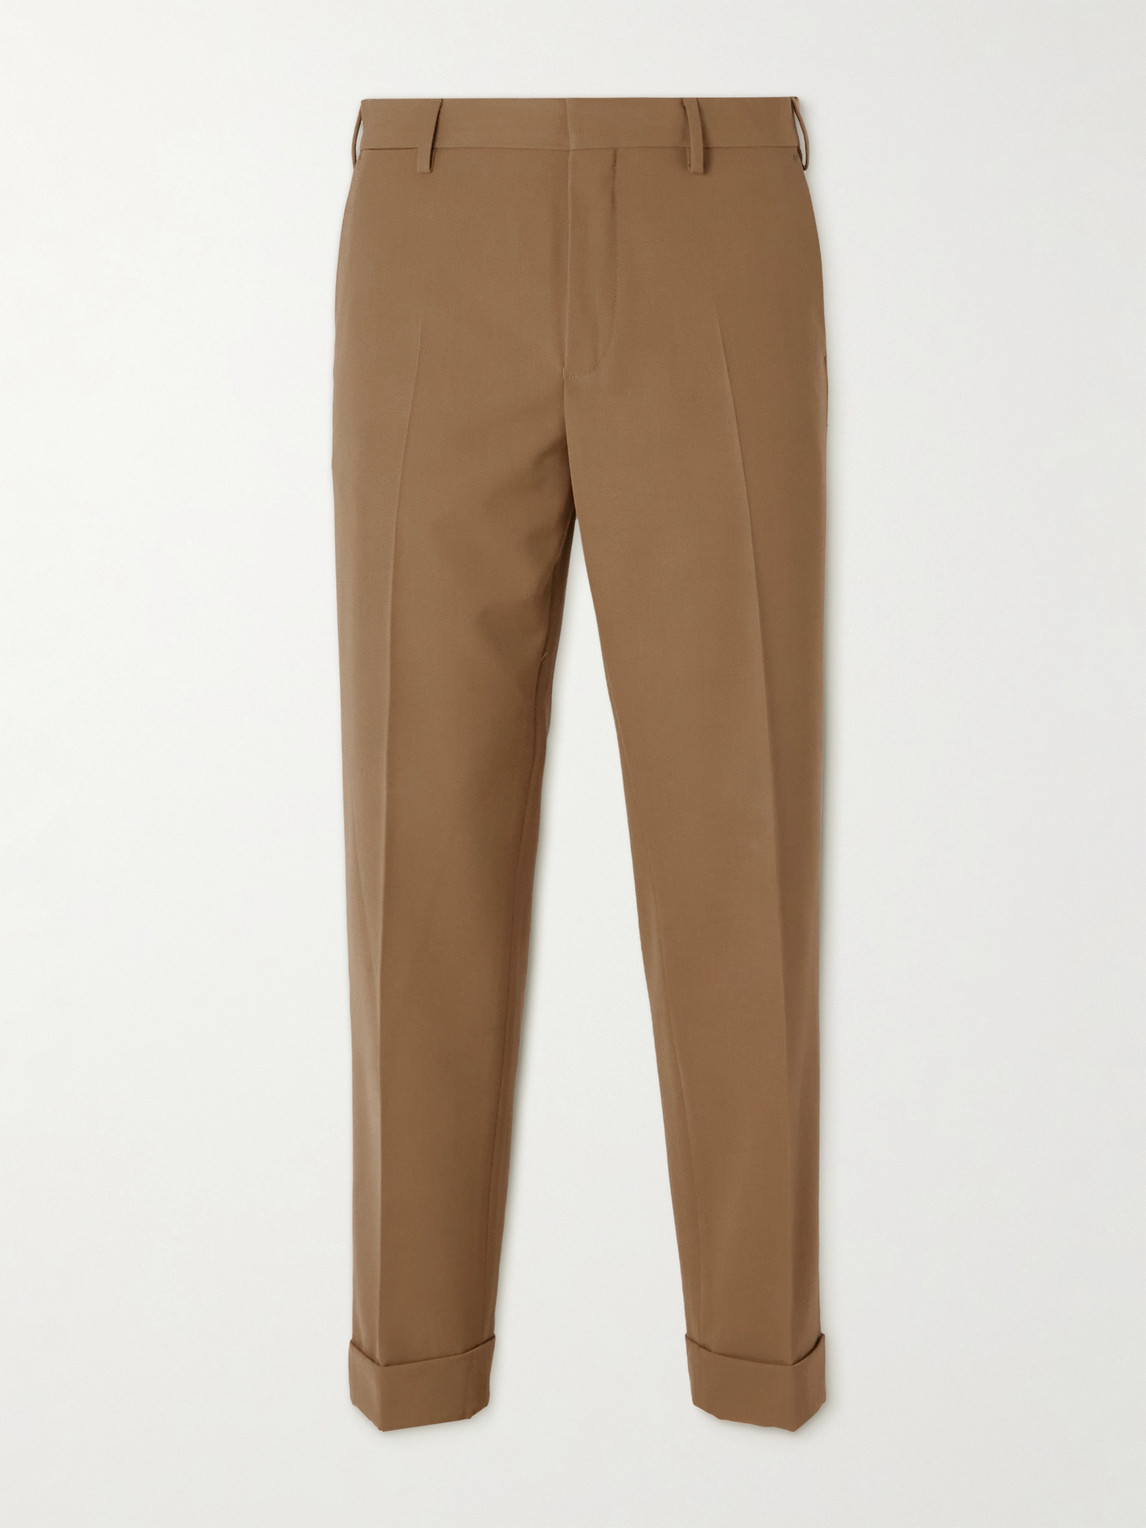 DRIES VAN NOTEN PHILIP TAPERED PLEATED TWILL TROUSERS